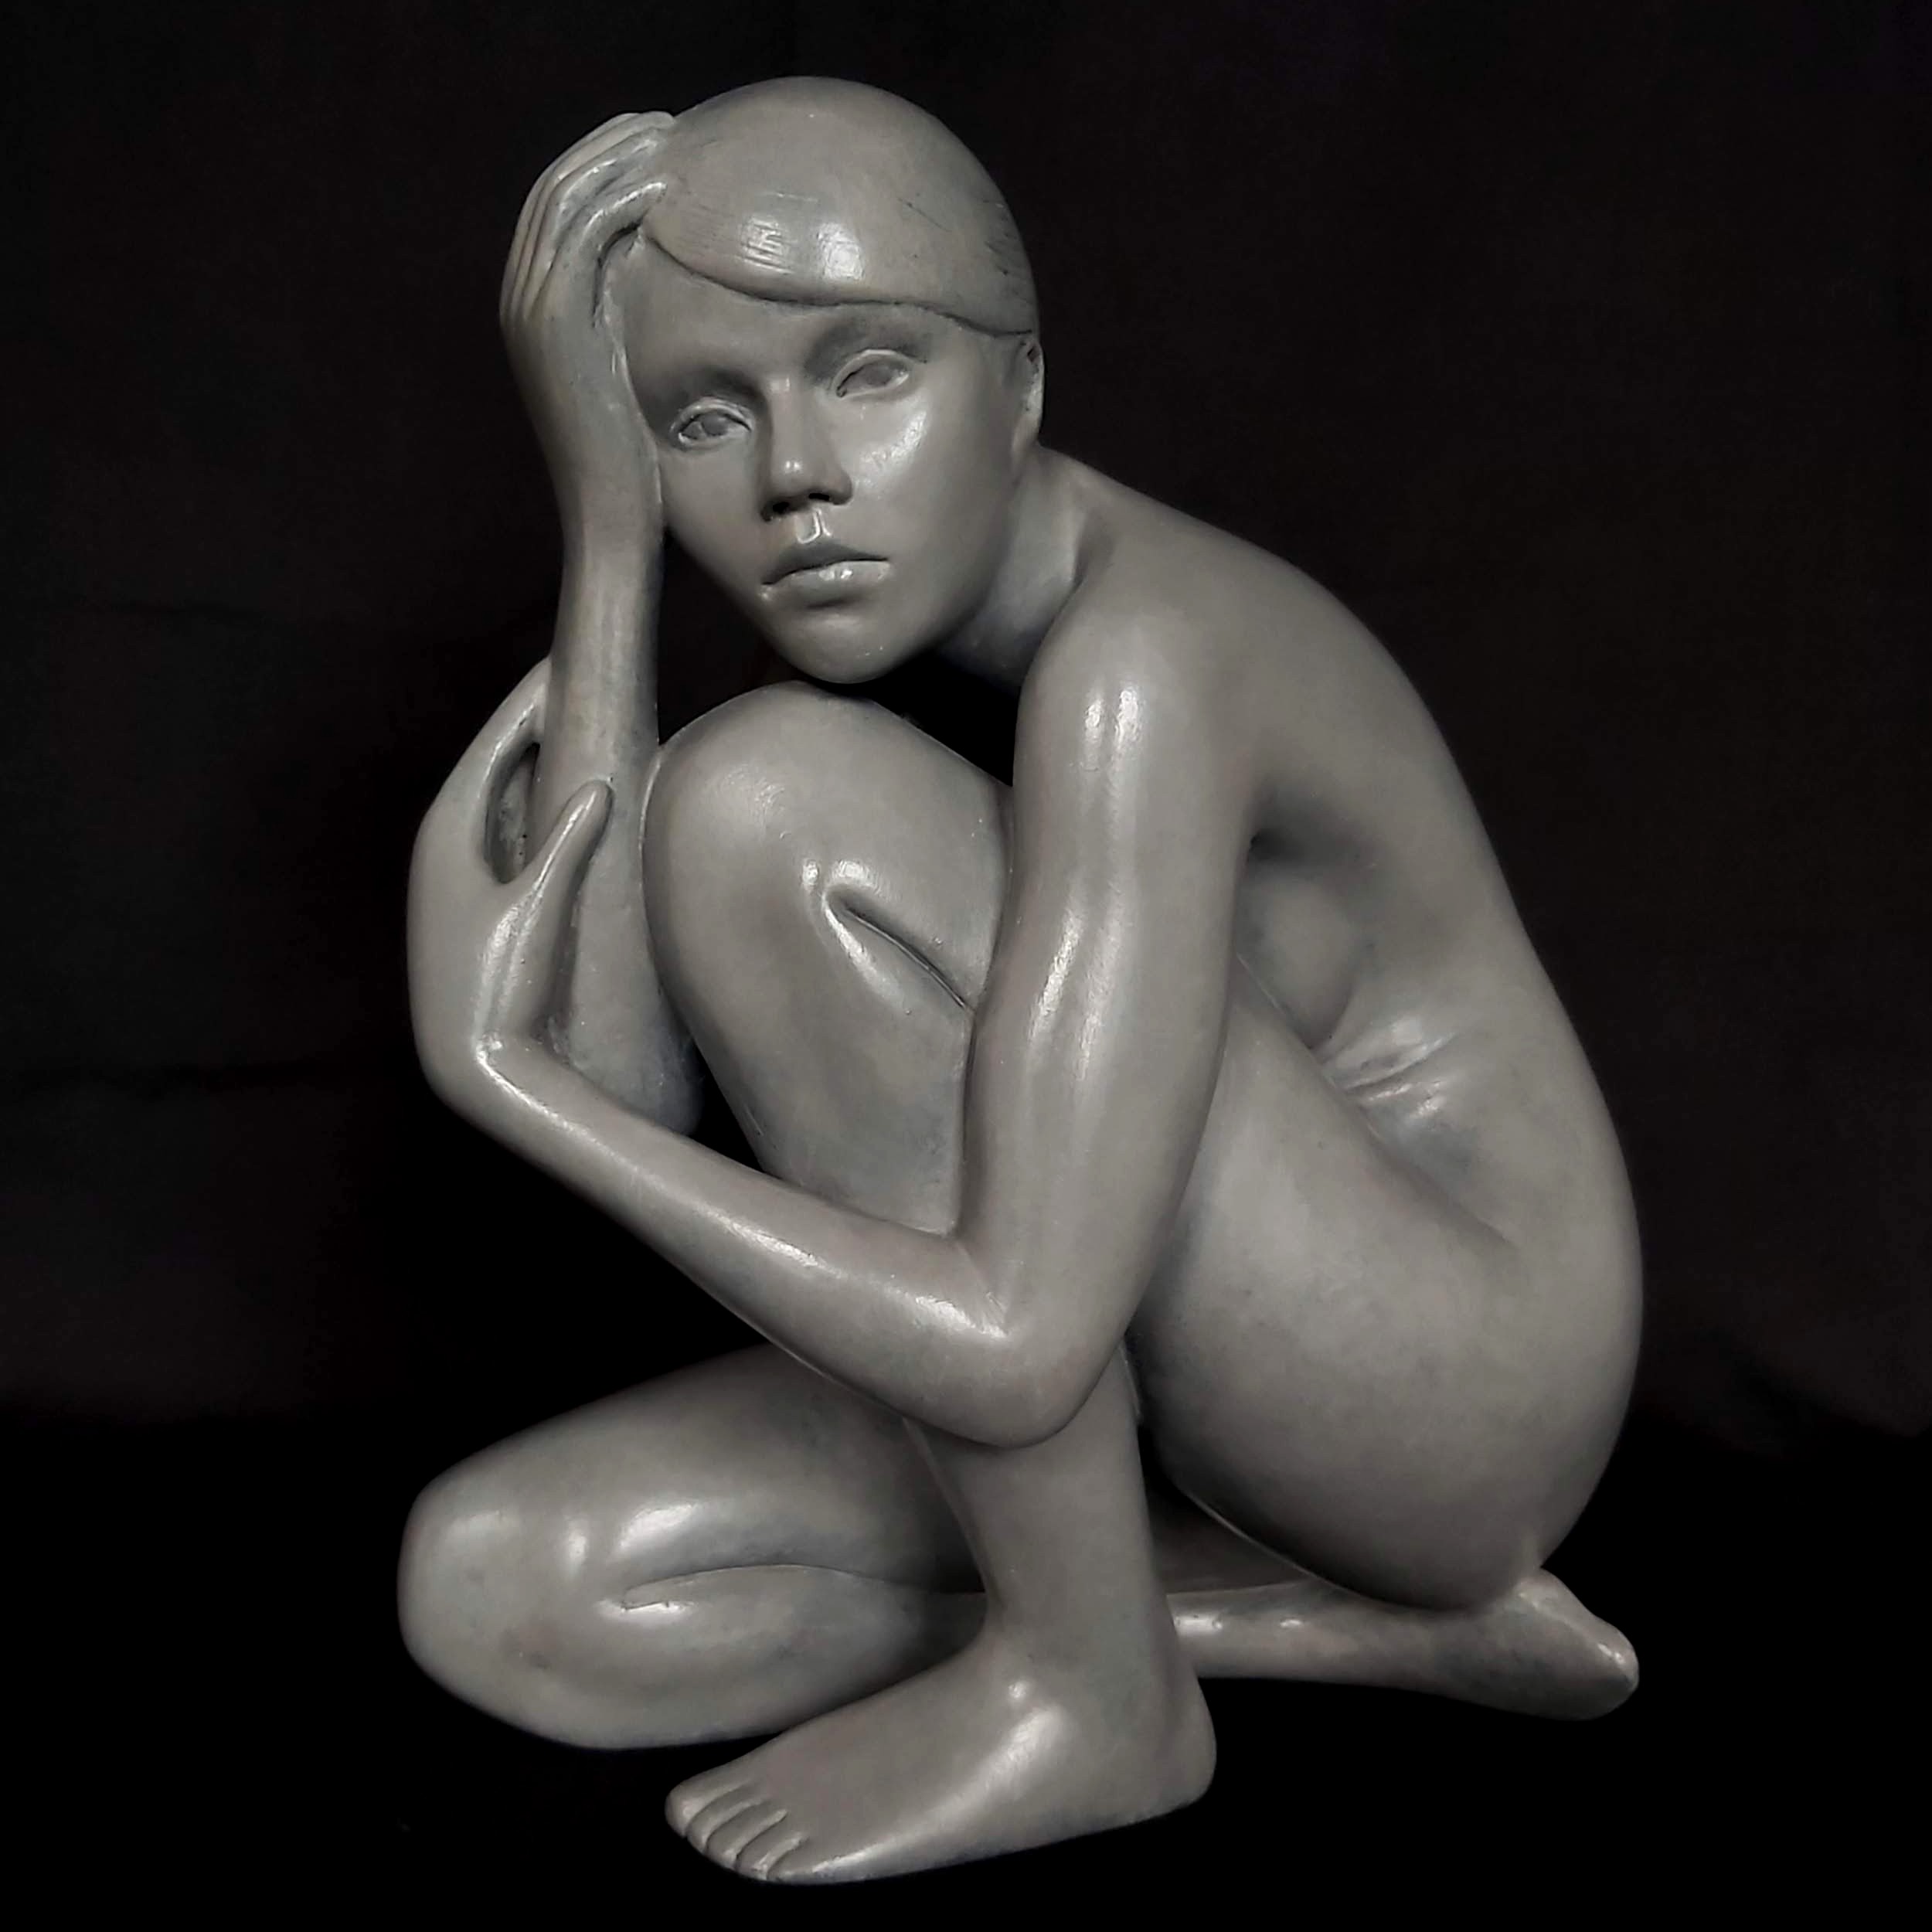 Limited Edition Sculpture